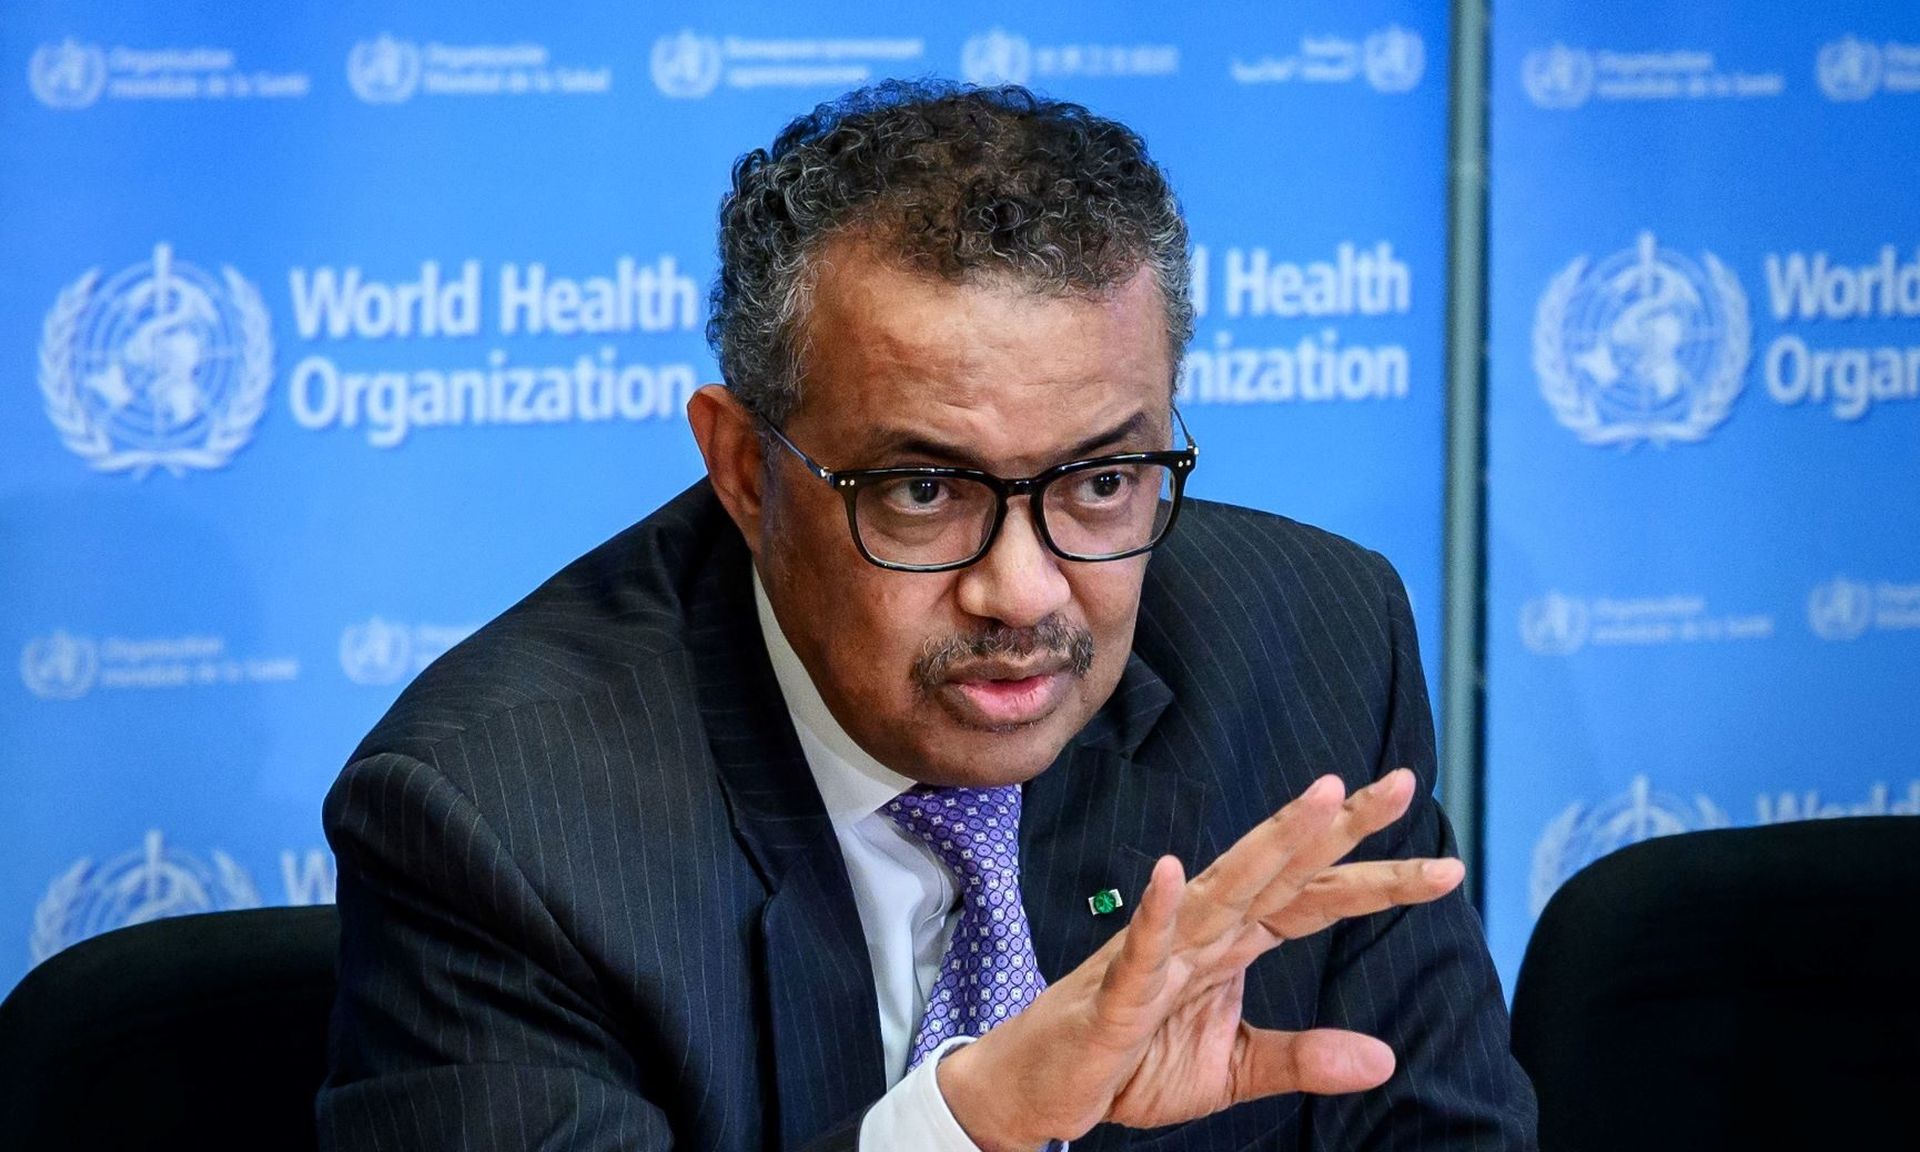 World Health Organization Director-General Tedros Adhanom Ghebreyesus speaks during a daily press briefing this summer on the COVID-19 virus at the WHO headquarters in Geneva. The WHO has been a consistent target of attackers looking to gain sensitive health information during the COVID-19 period. Today’s columnist, Tom Kellermann of VMware Carbon ...